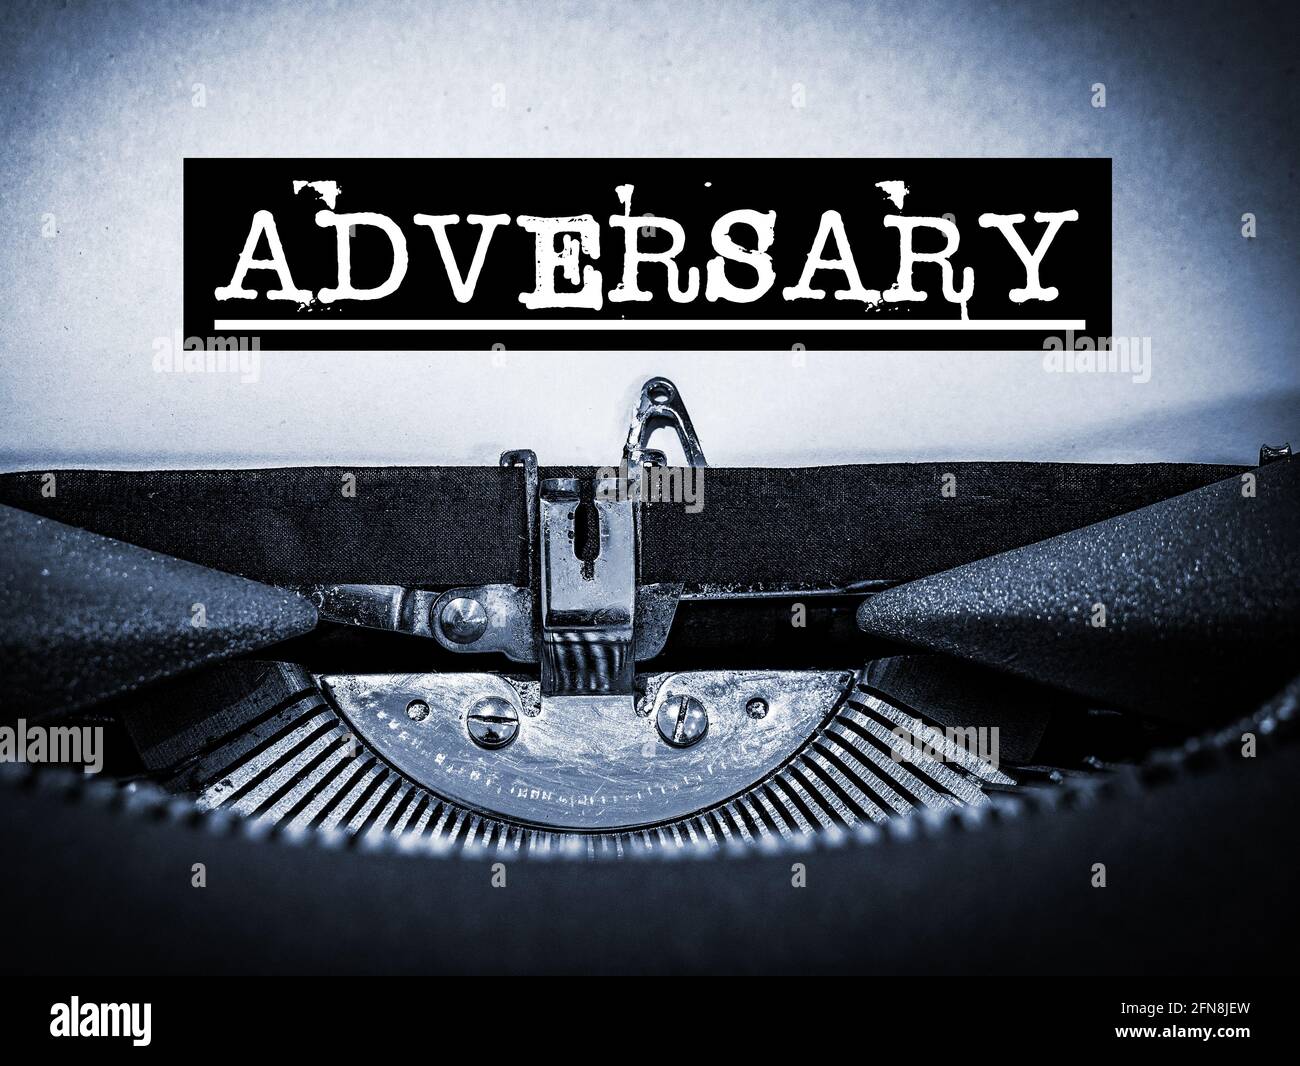 Adversary displayed on a vintage typewriter with underline script and black border Stock Photo